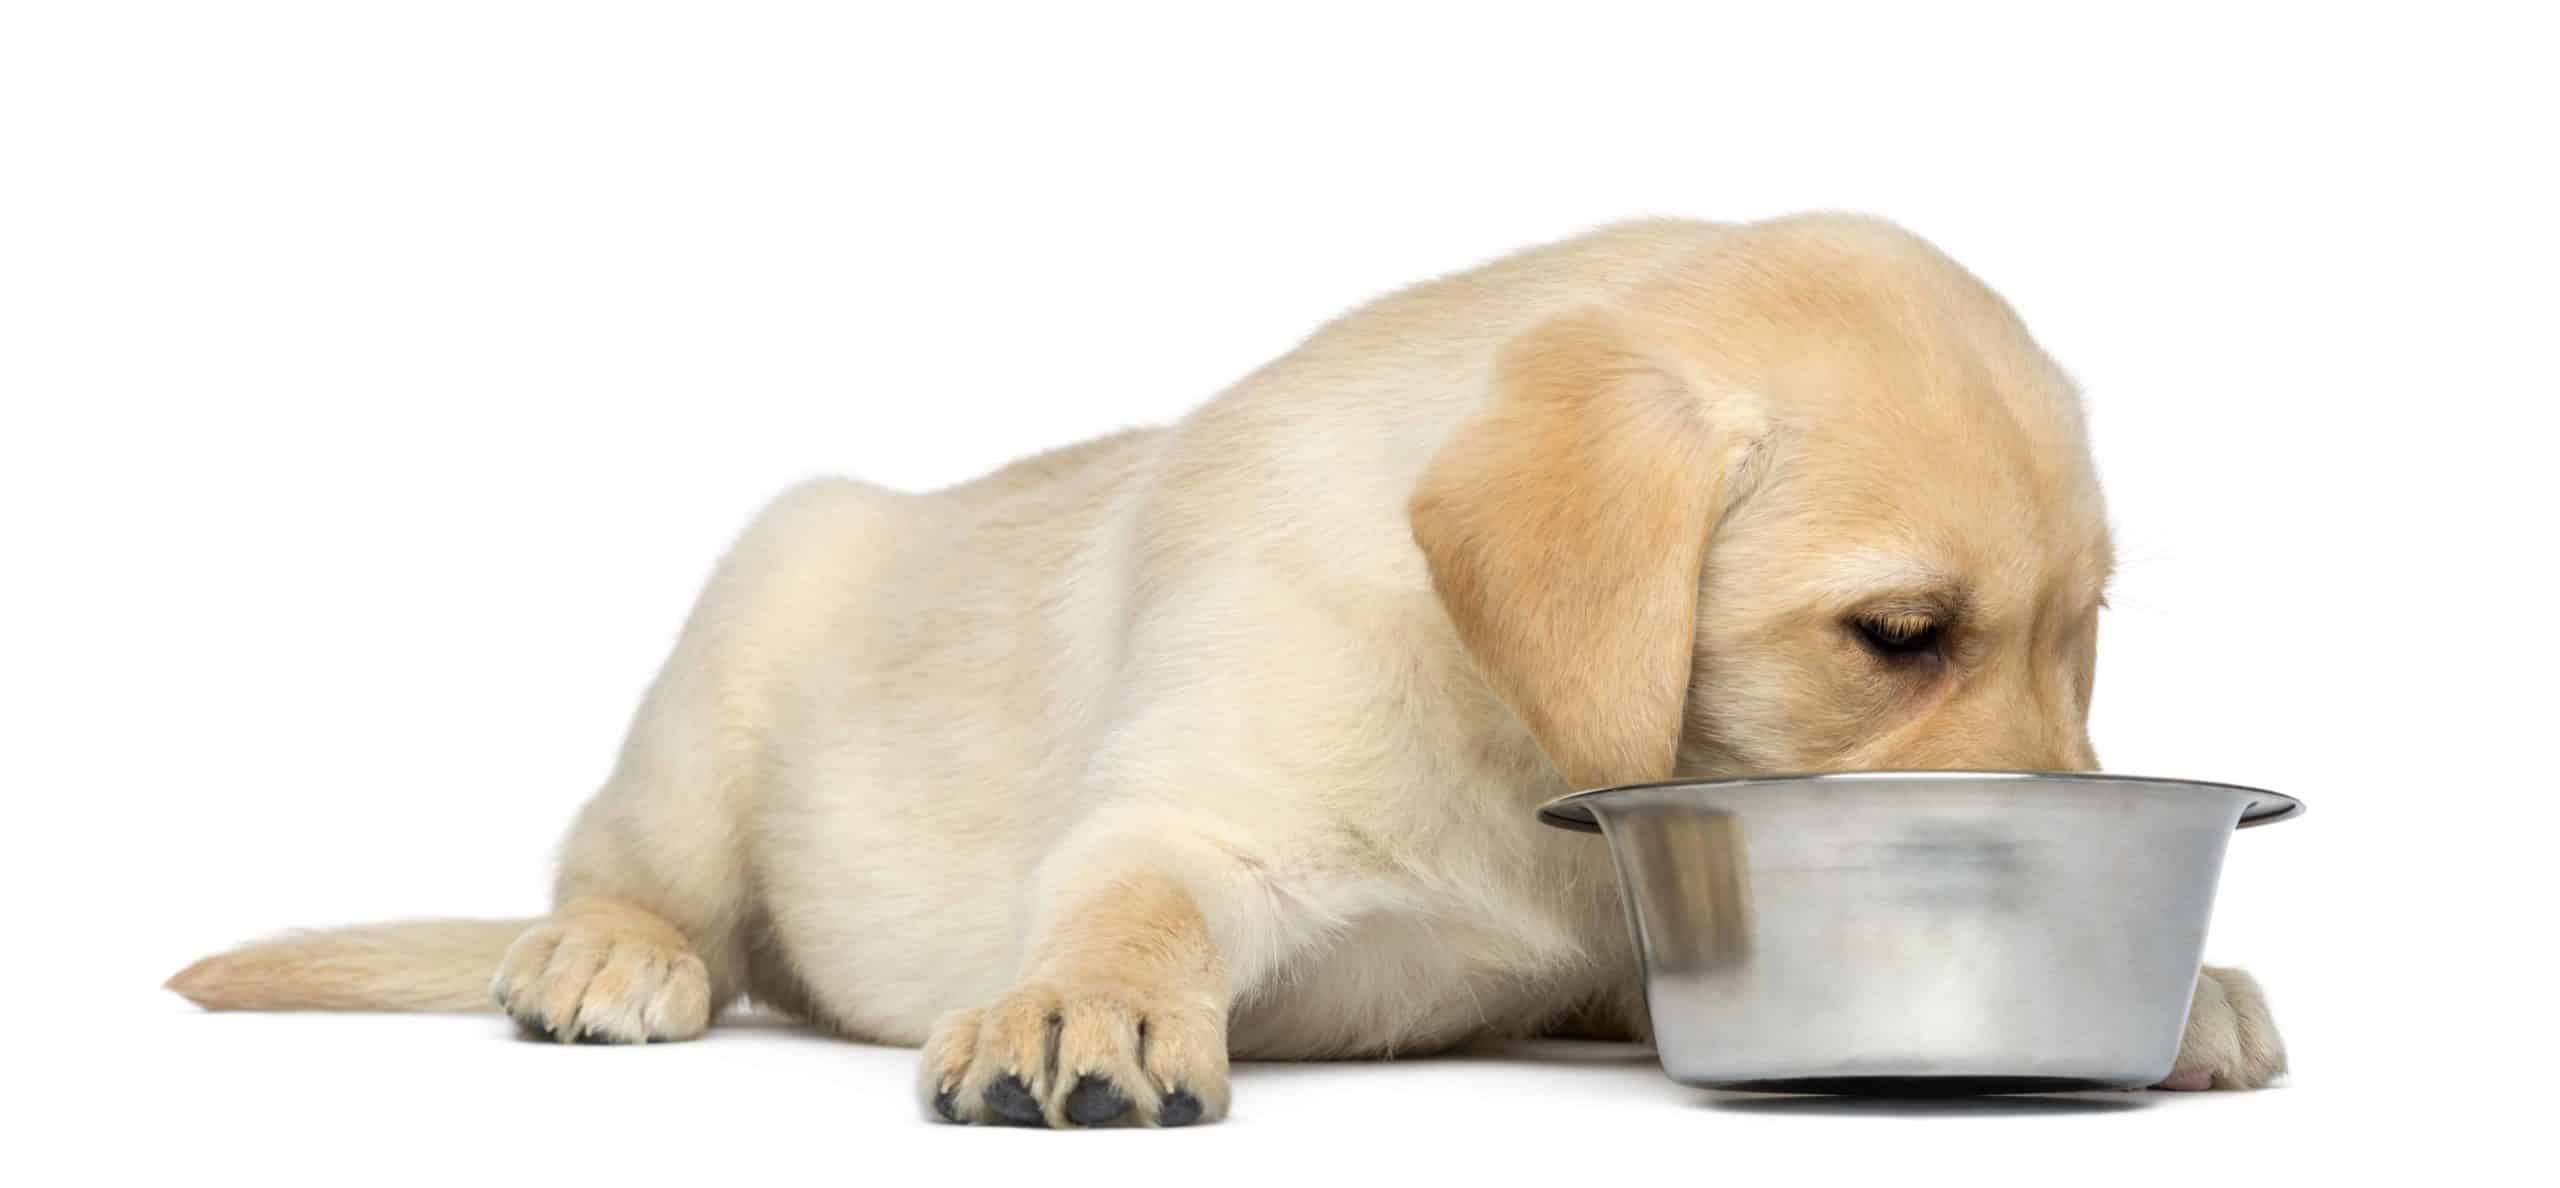 Labrador retriever puppy eats out of metal bowl. Feed your puppy two or three smaller meals per day and don't be alarmed if he occasionally skips a meal.